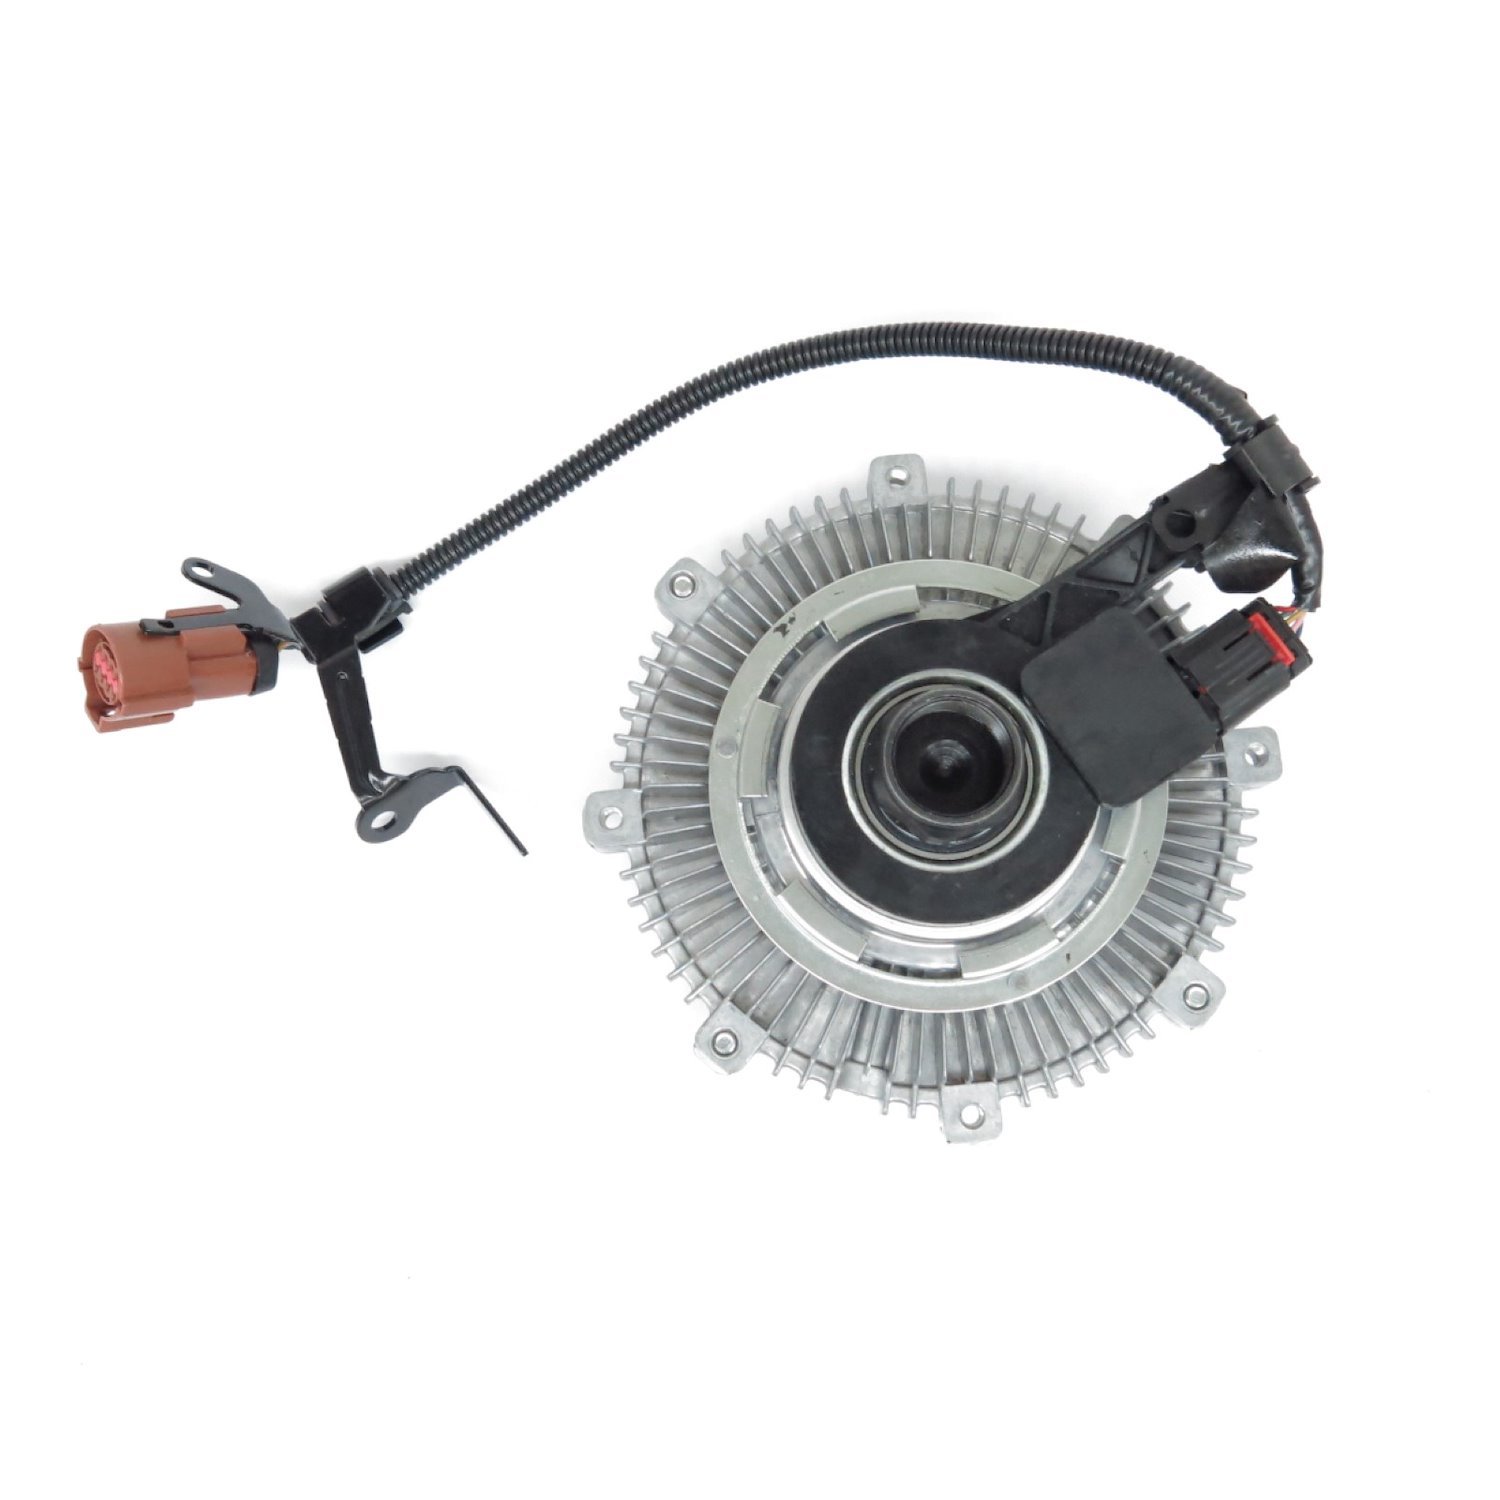 Electro-Viscous Fan Clutch for 2009-2010 Ford F-150 4.6/5.4L V8